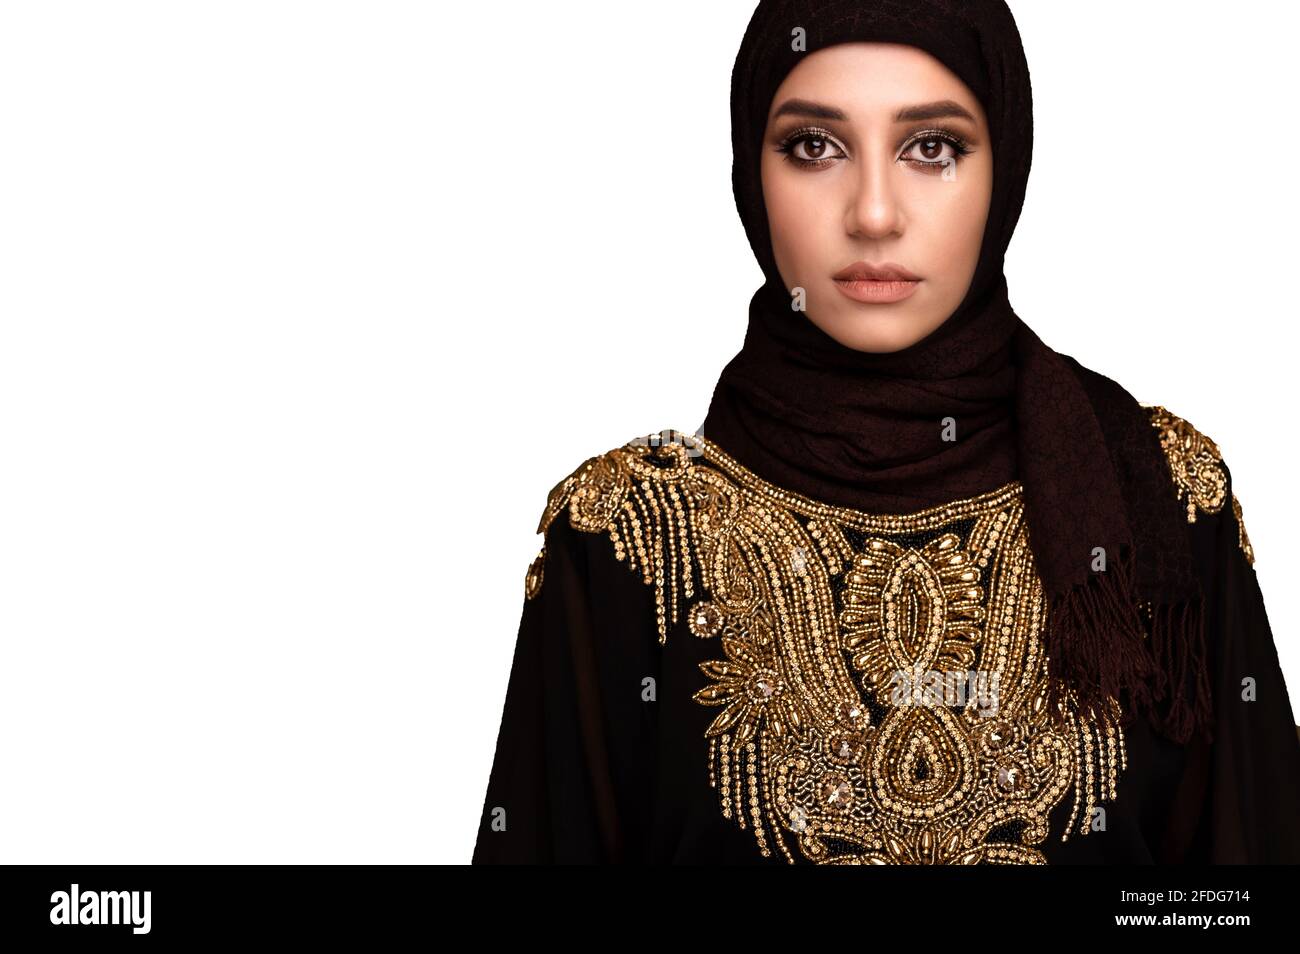 Muslim Woman In Hijab Portrait Of A Young Arab Girl In Traditional Dress White Background